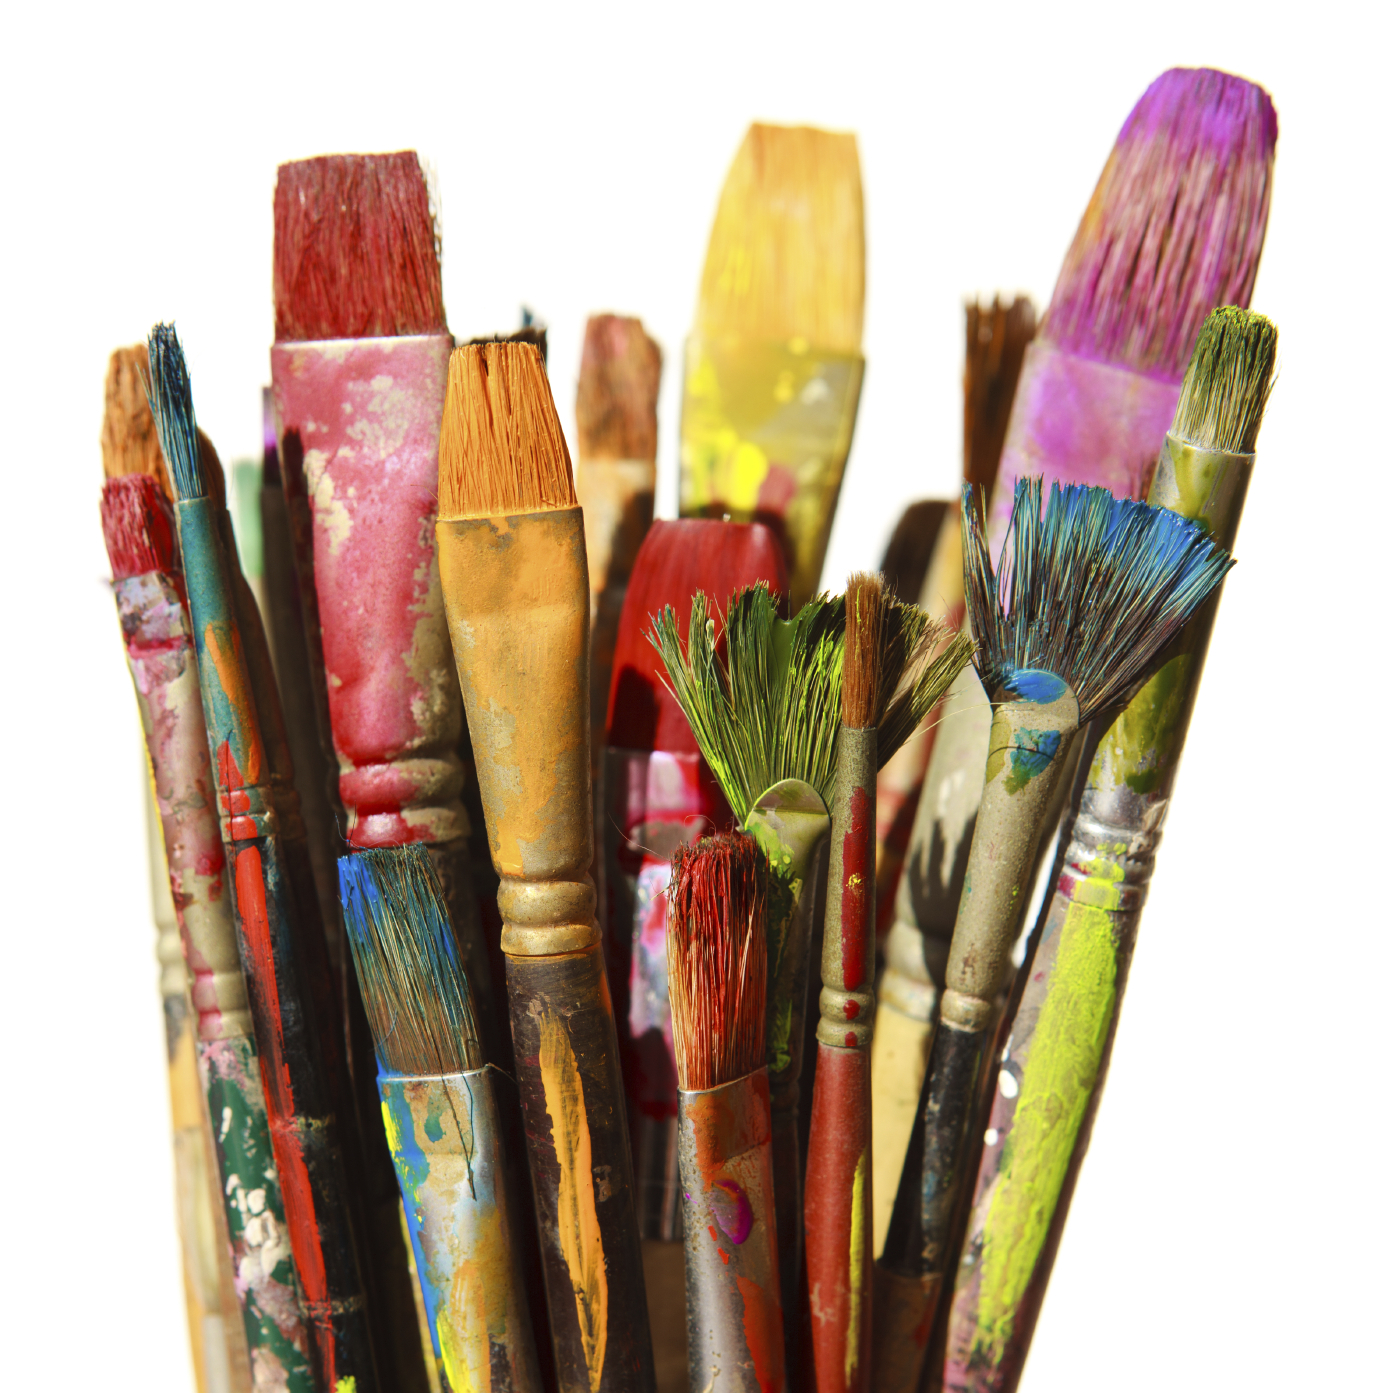 Favorite Paint Brush? | Painting Wiki | FANDOM powered by Wikia